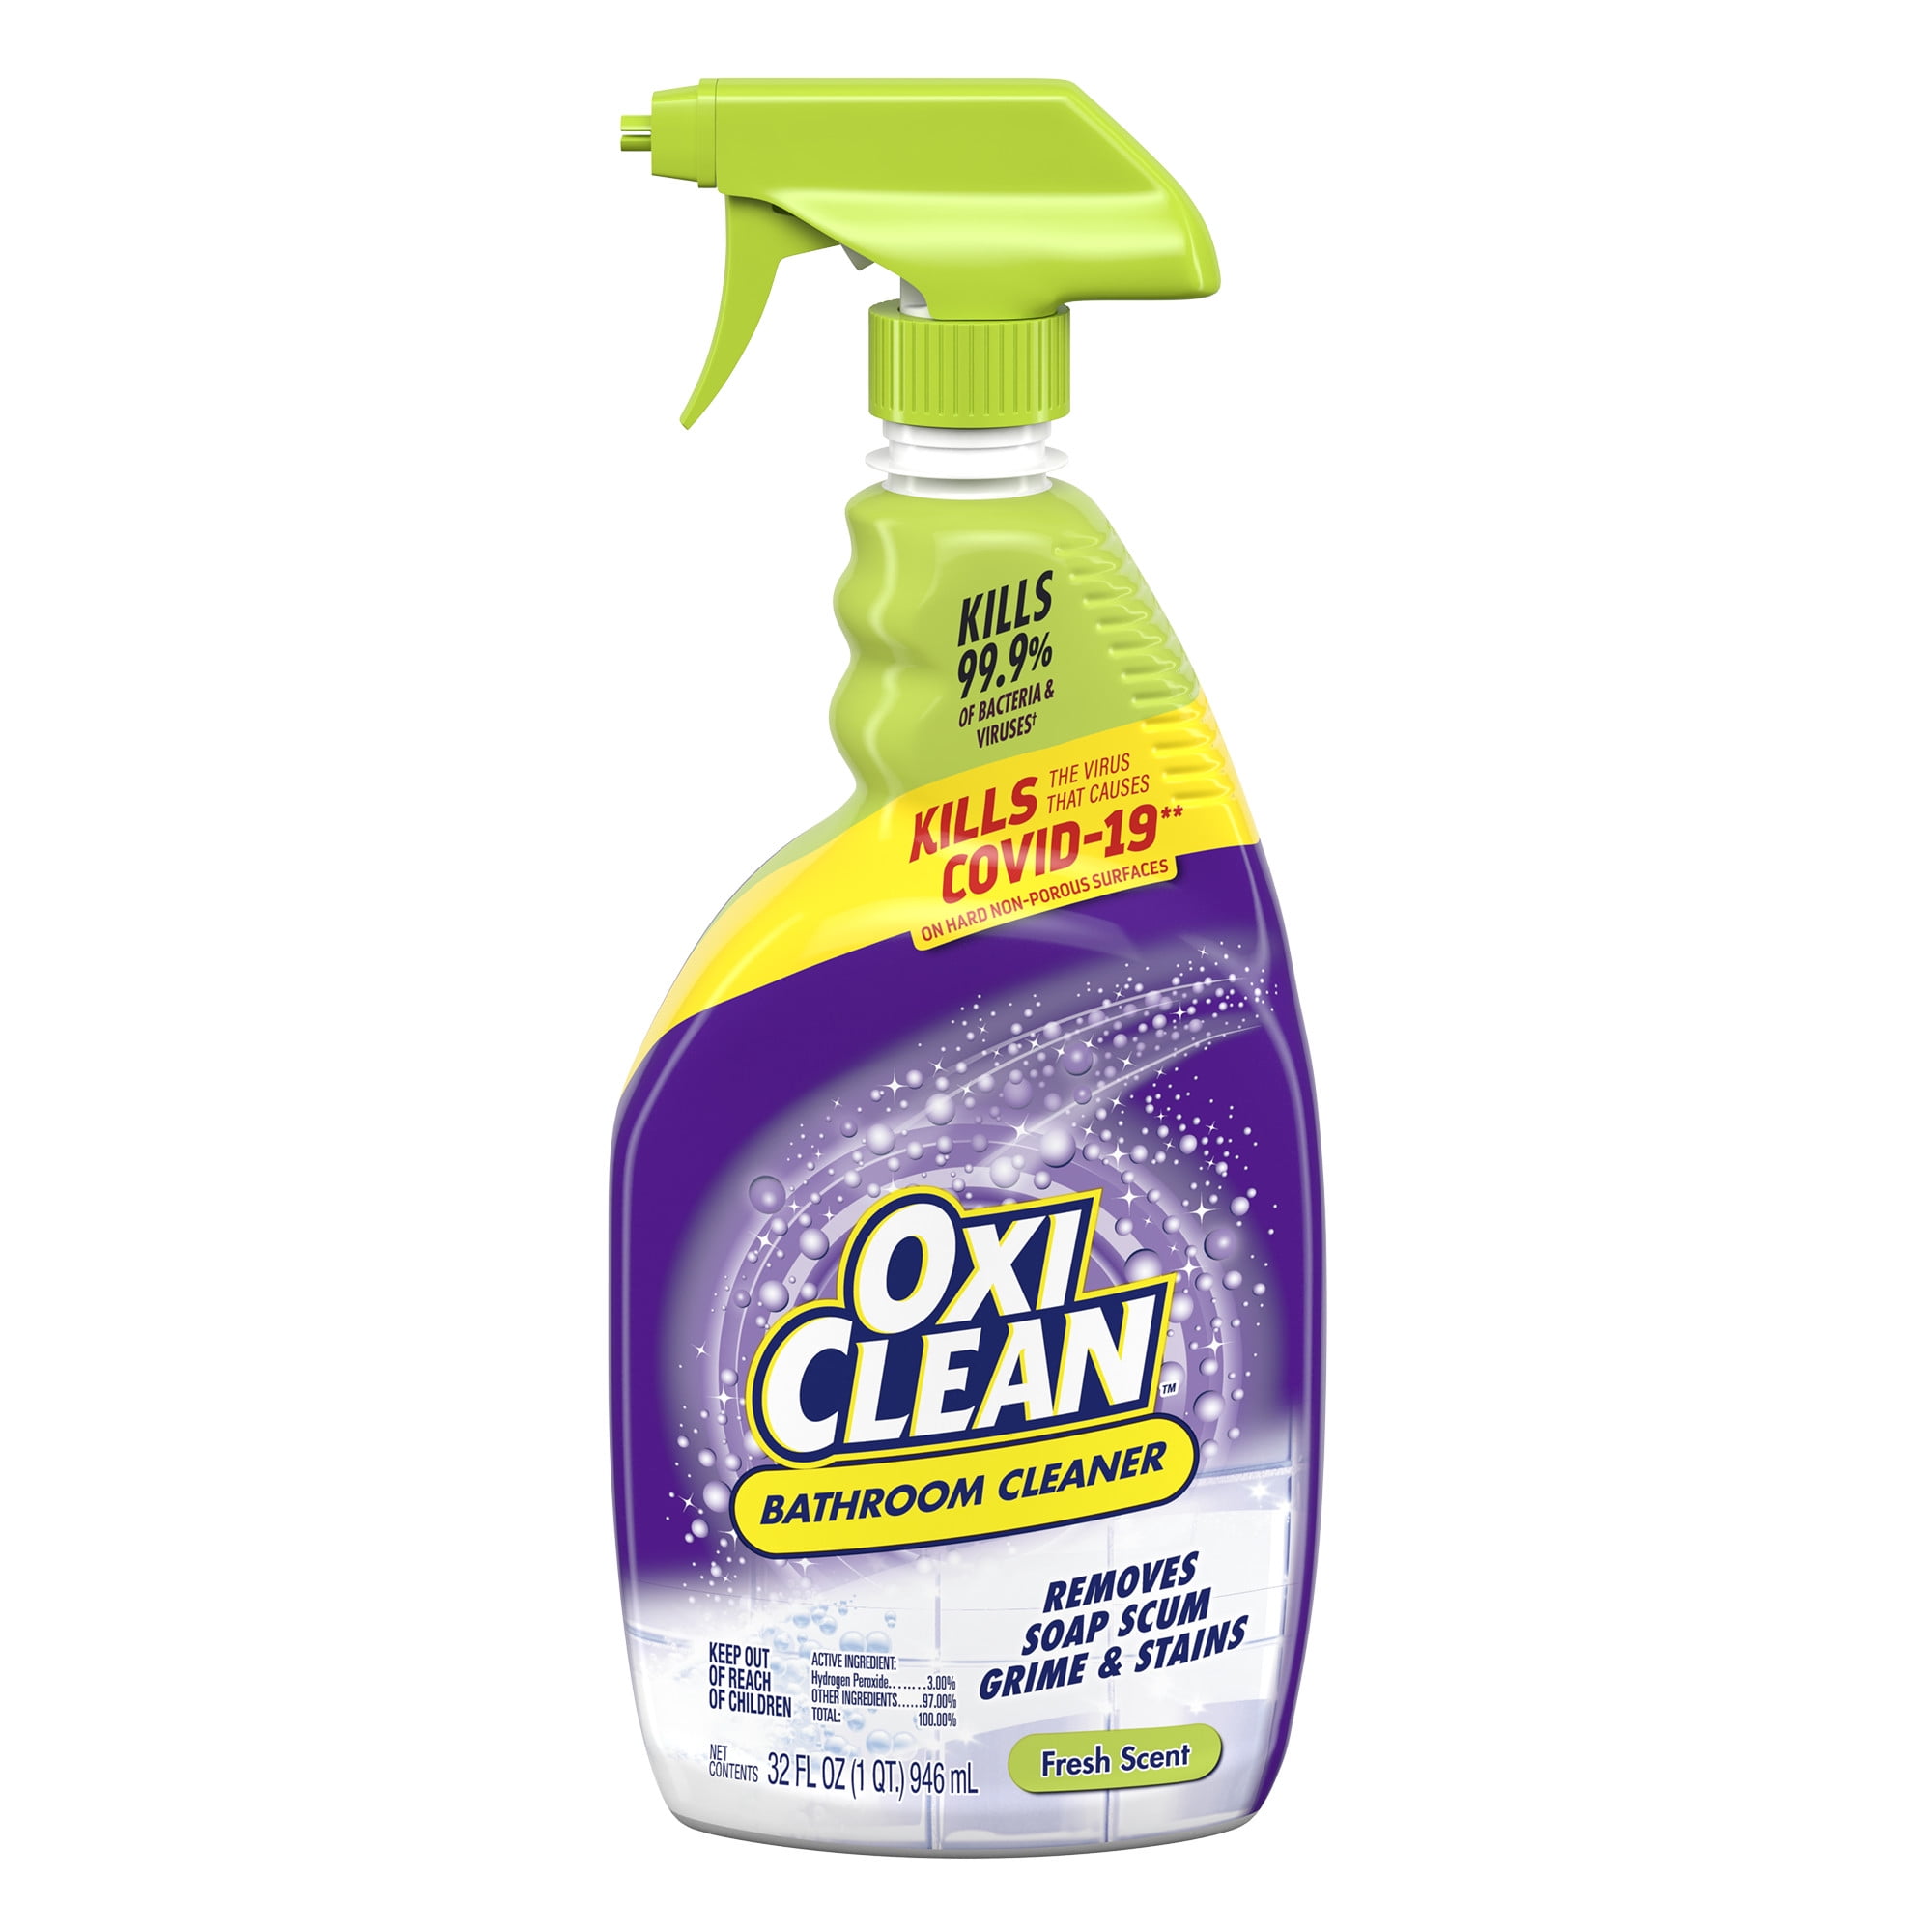 OxiClean Bathroom Cleaner, Shower, Tub  Tile, powered by OxiClean Stainfighters, 32oz.